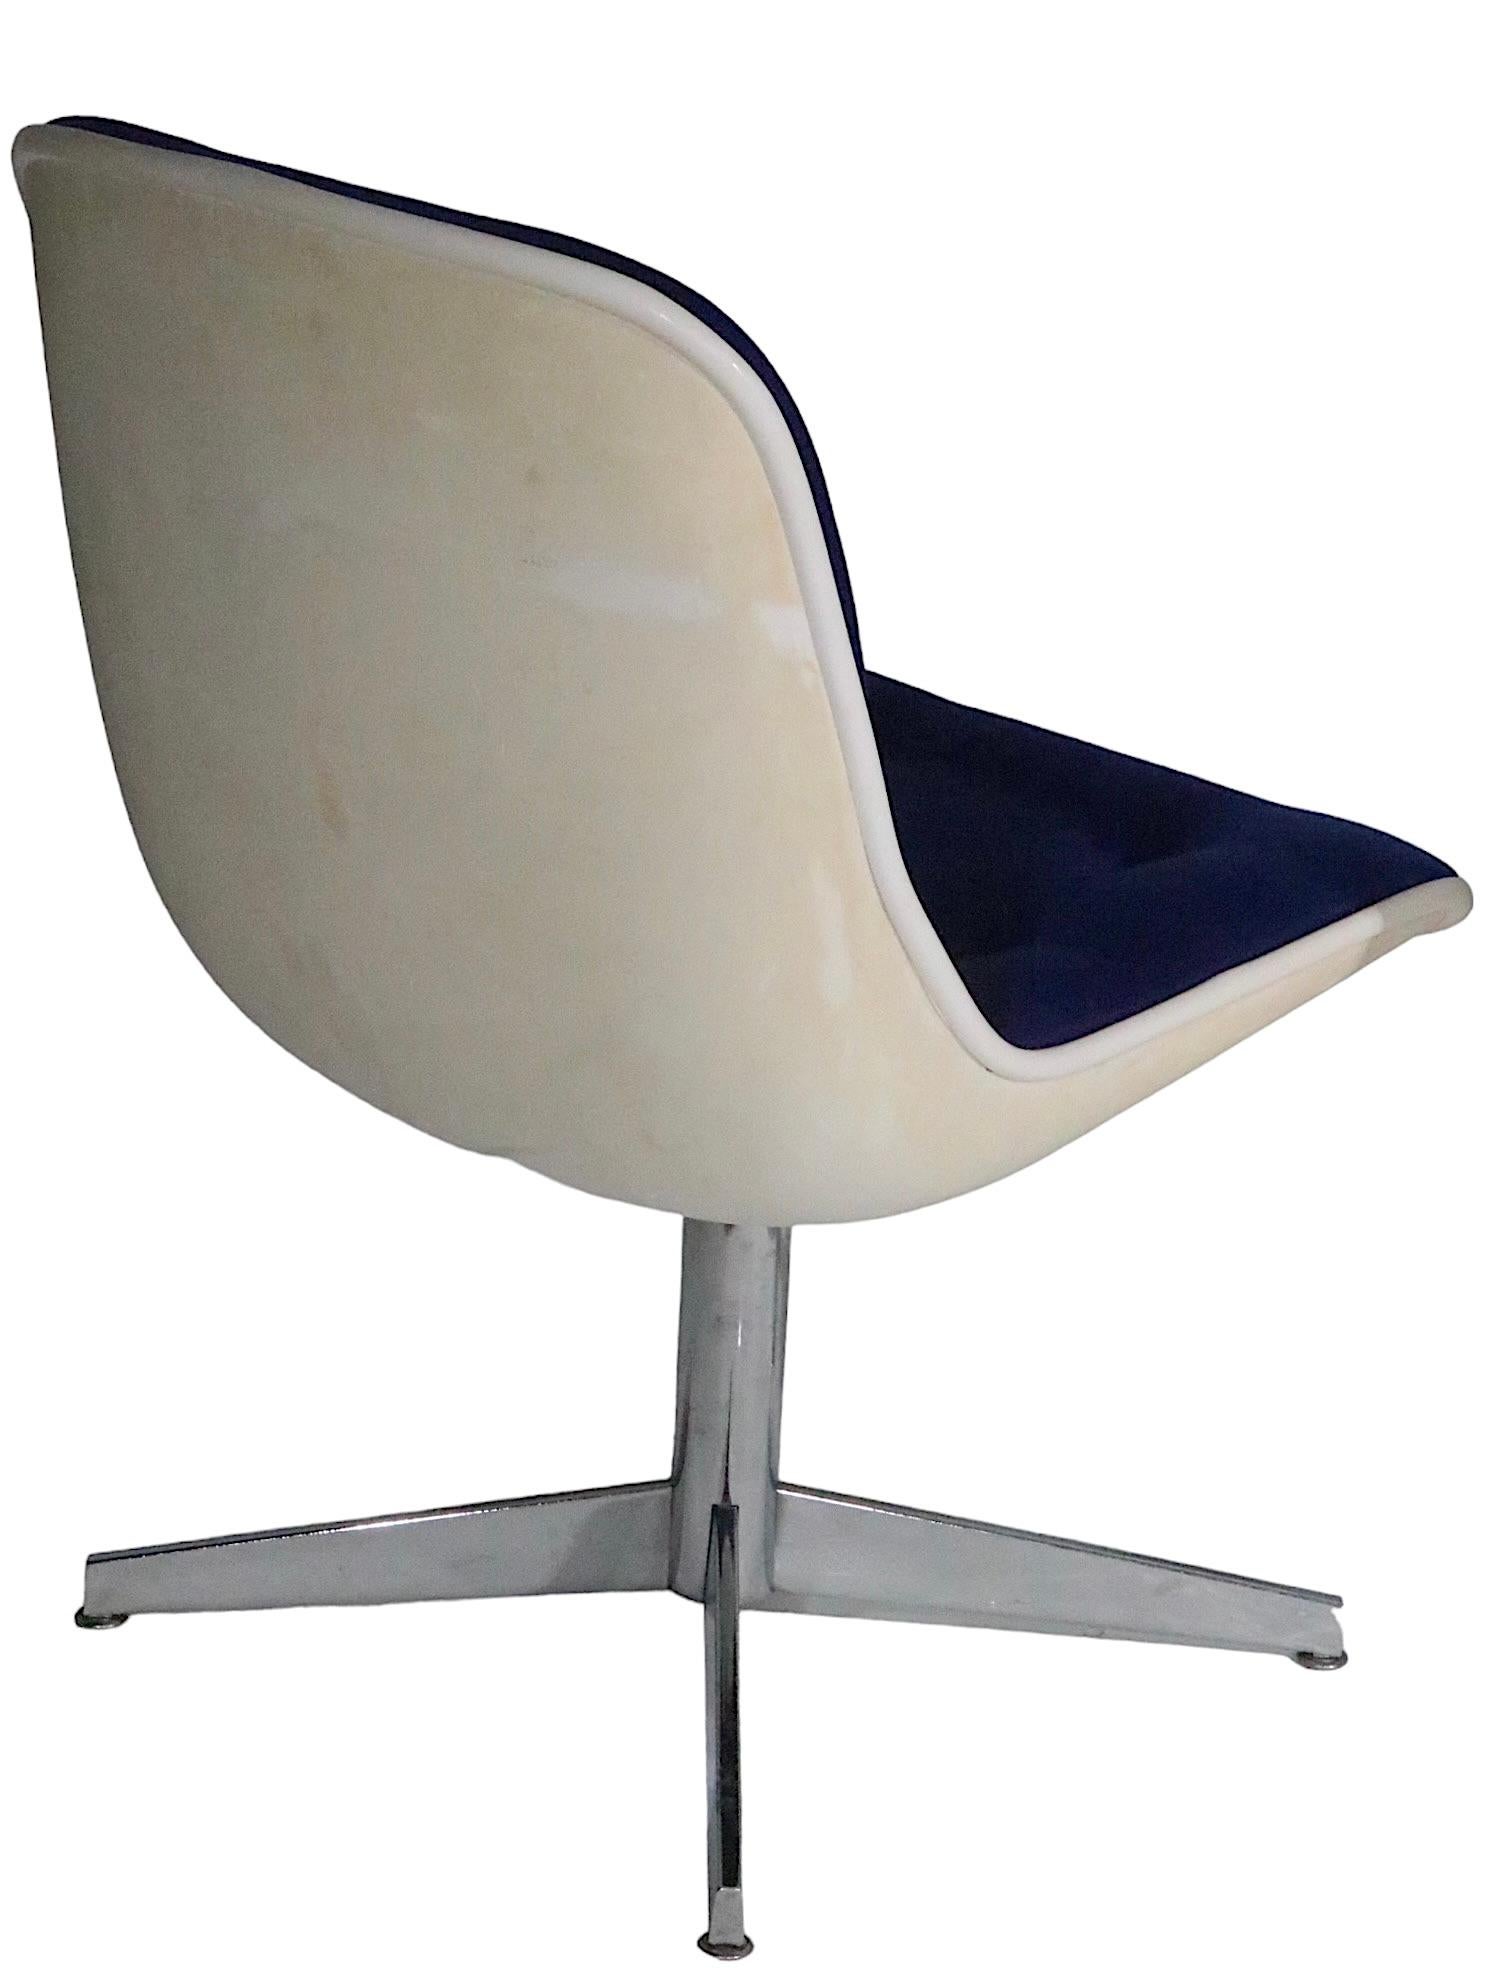 Steelcase Swivel  Chairs in the style of Pollack c.1970's 6 available For Sale 1